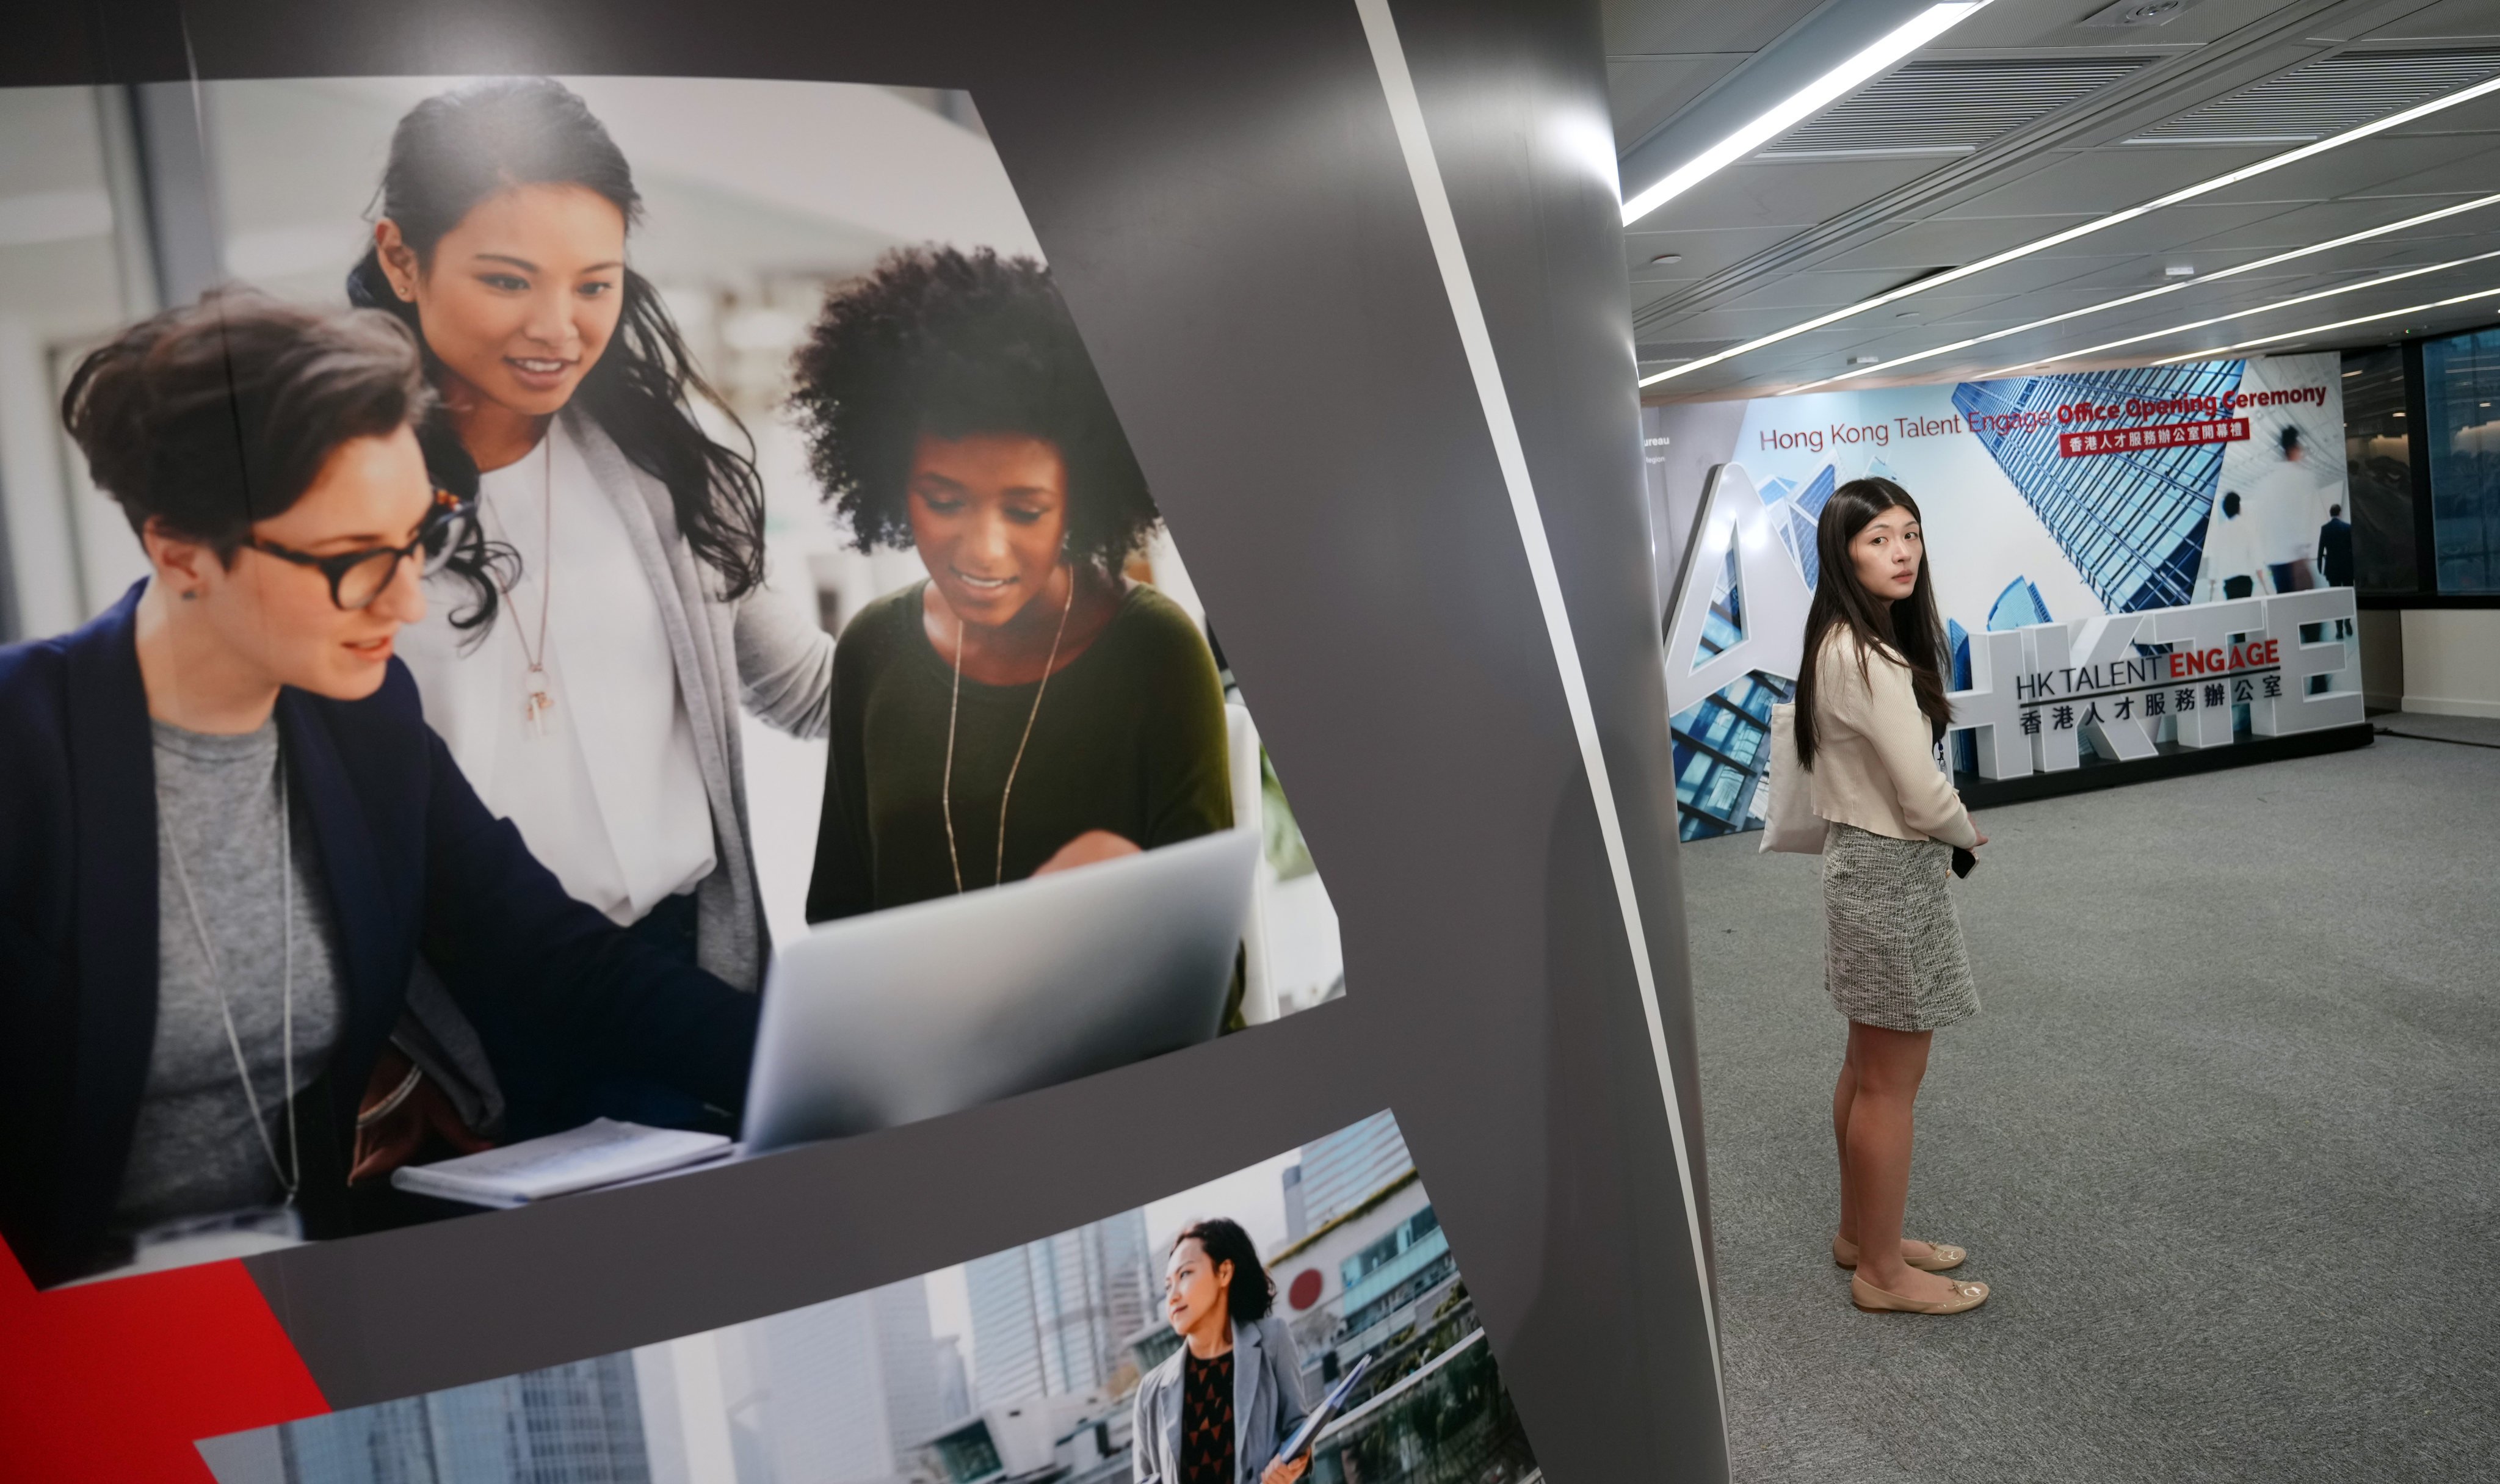 The Hong Kong Talent Engage Office in Wan Chai. The government introduced the Top Talent Pass Scheme in December 2022 to lure more professionals to the city. Photo: Sam Tsang